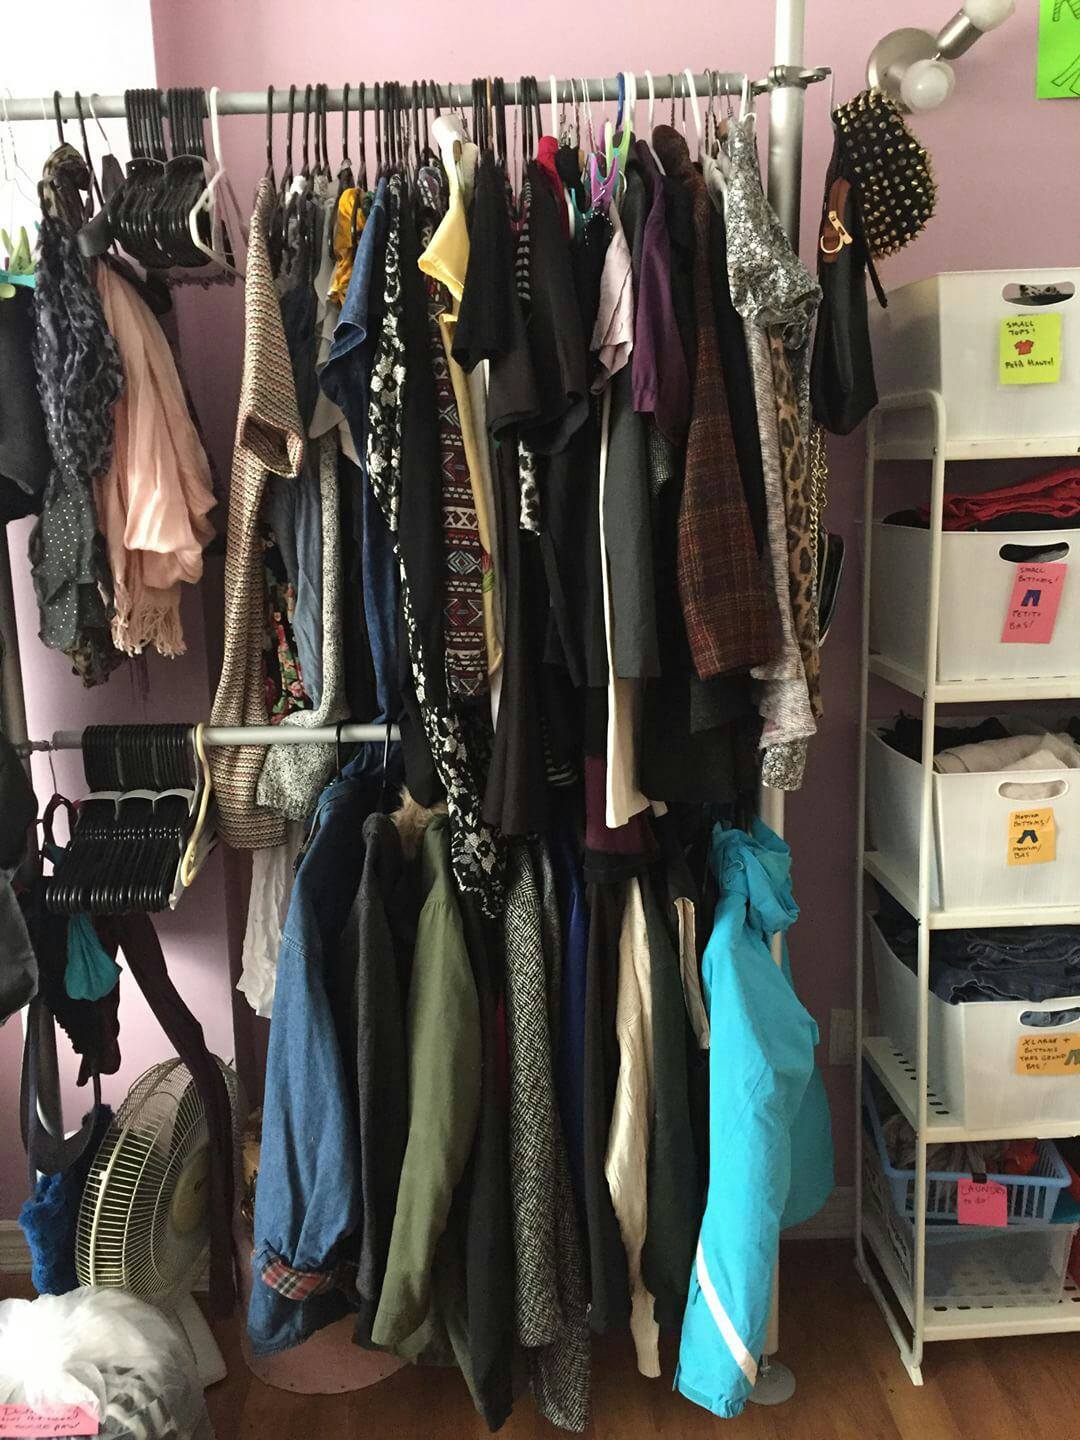 our clothing racks, filled with jackets, hats, scarves, etc